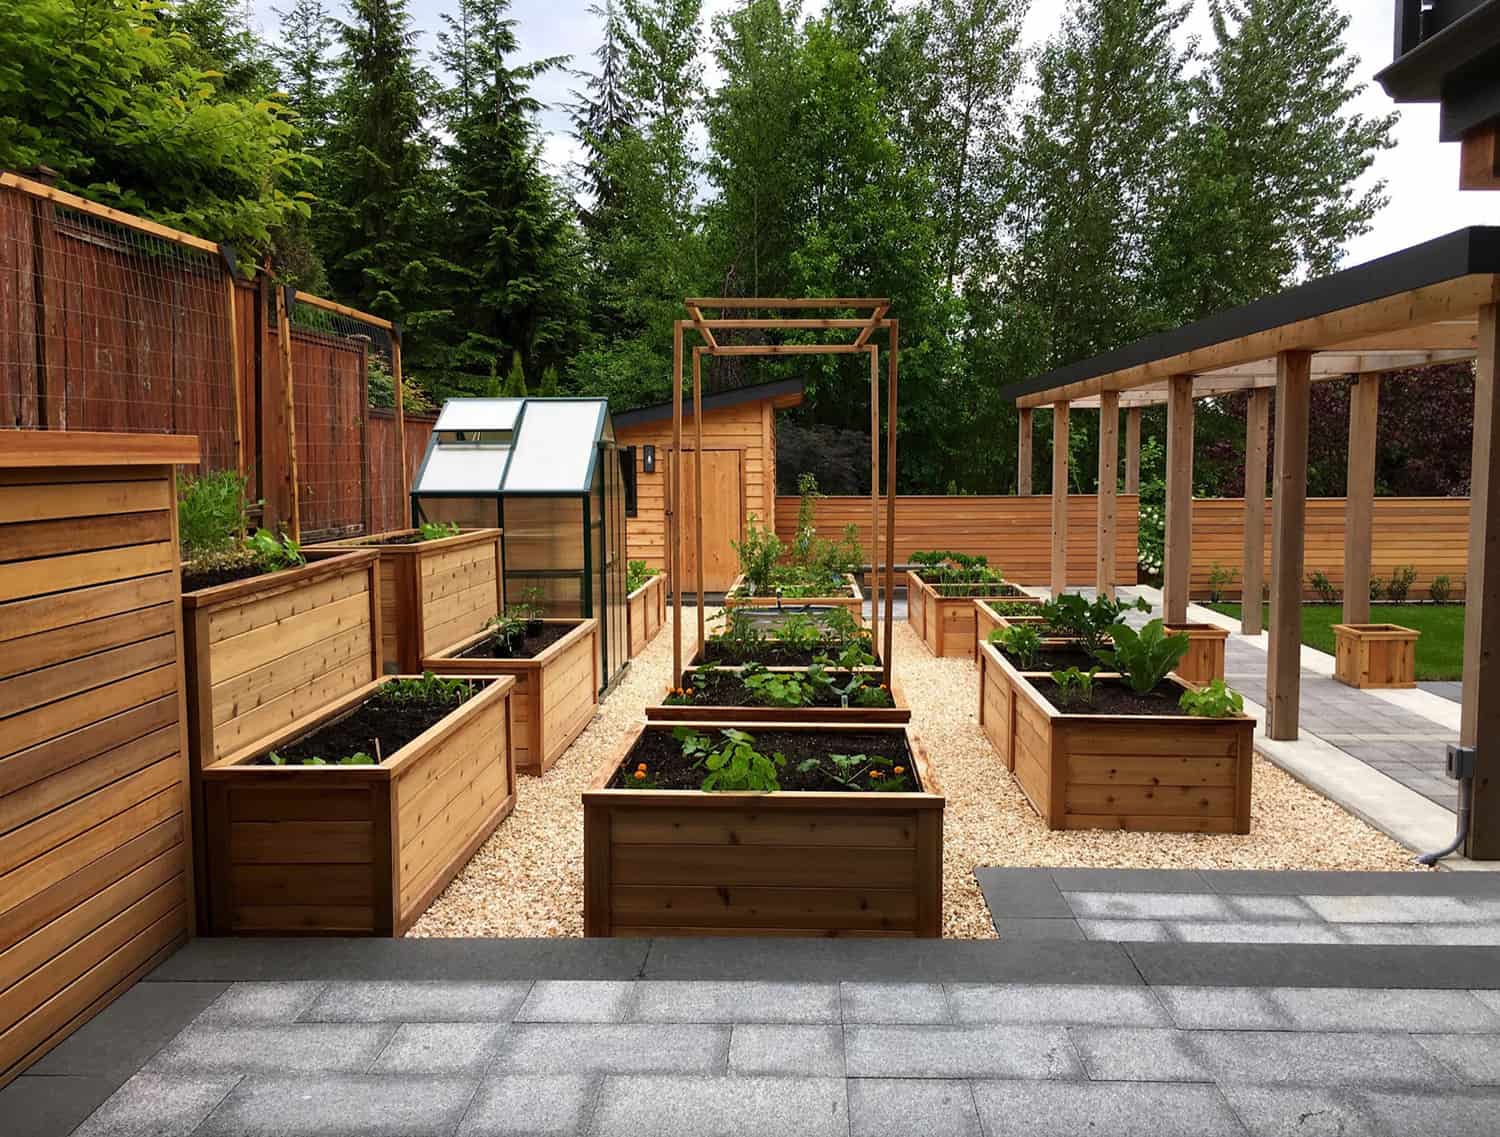 edible-kitchen-garden-with-raised-planter-beds